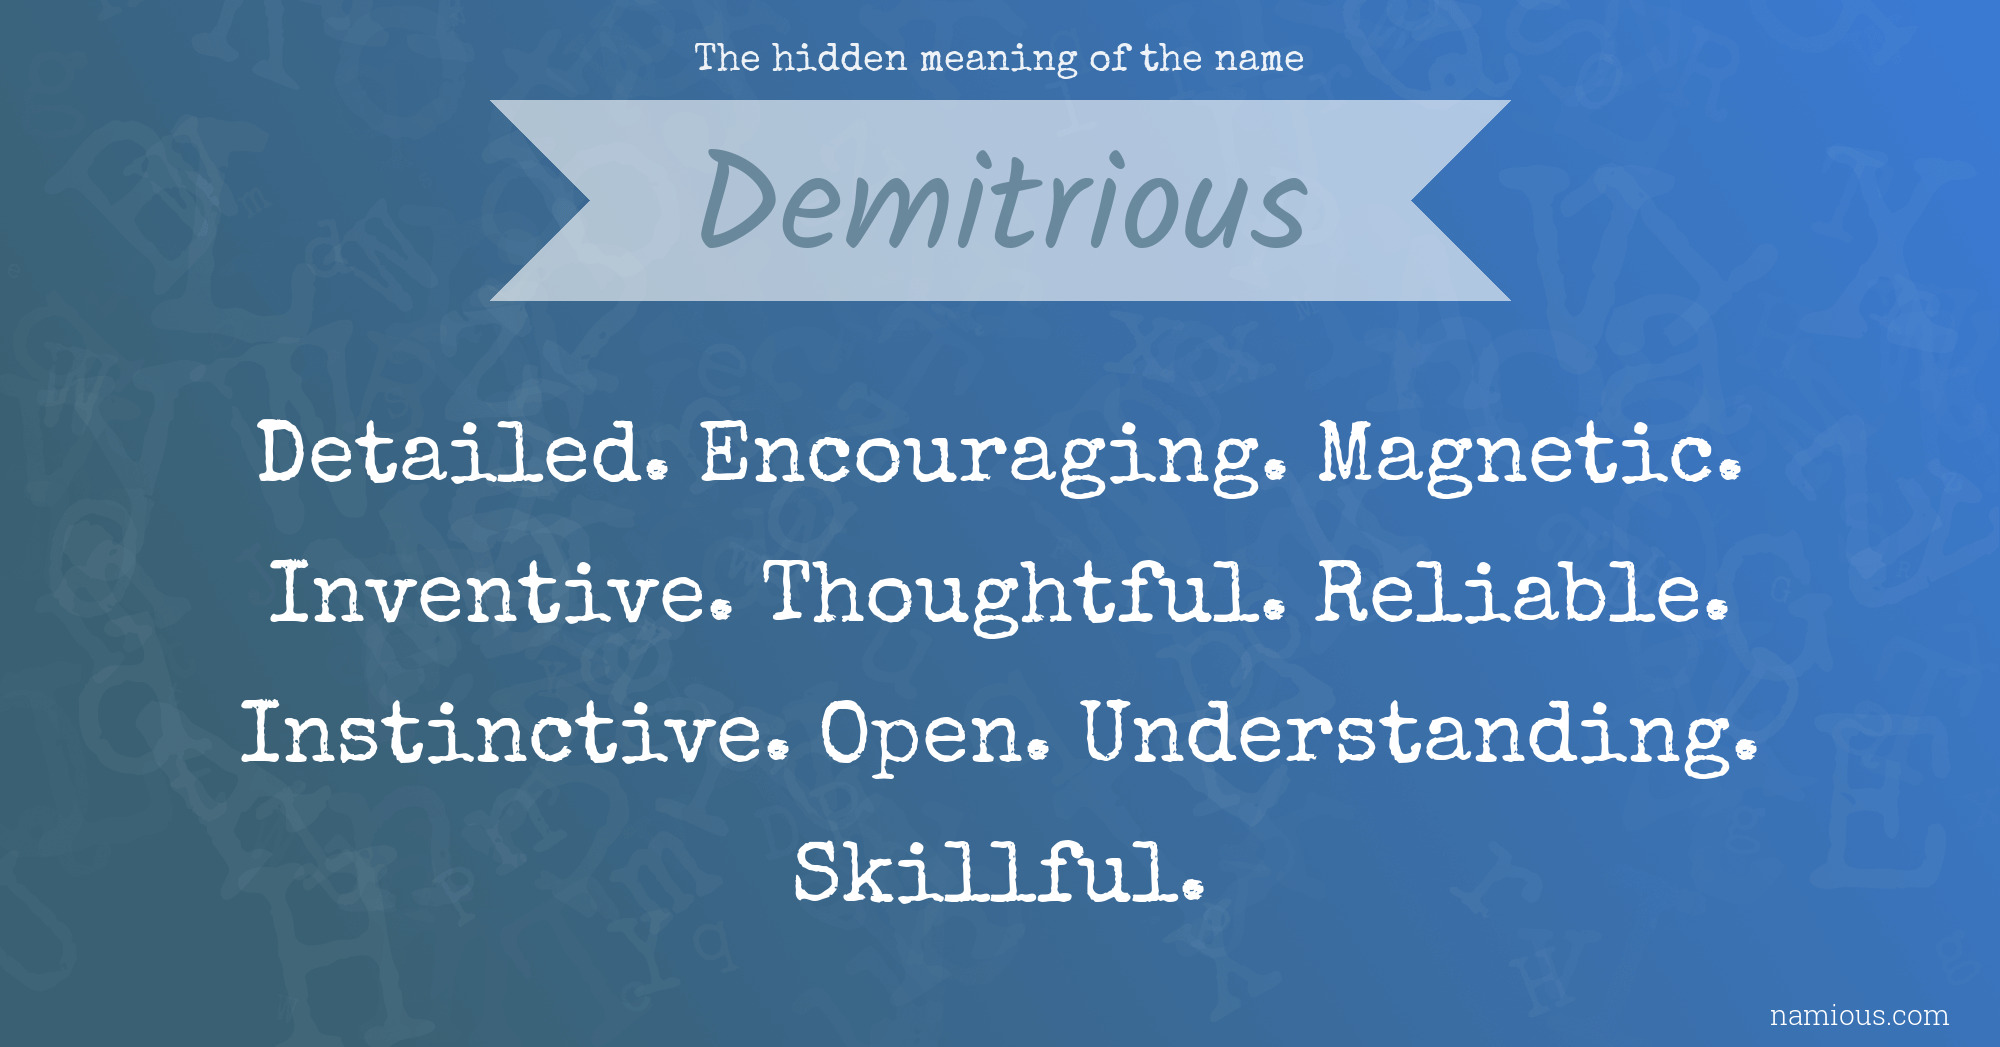 The hidden meaning of the name Demitrious